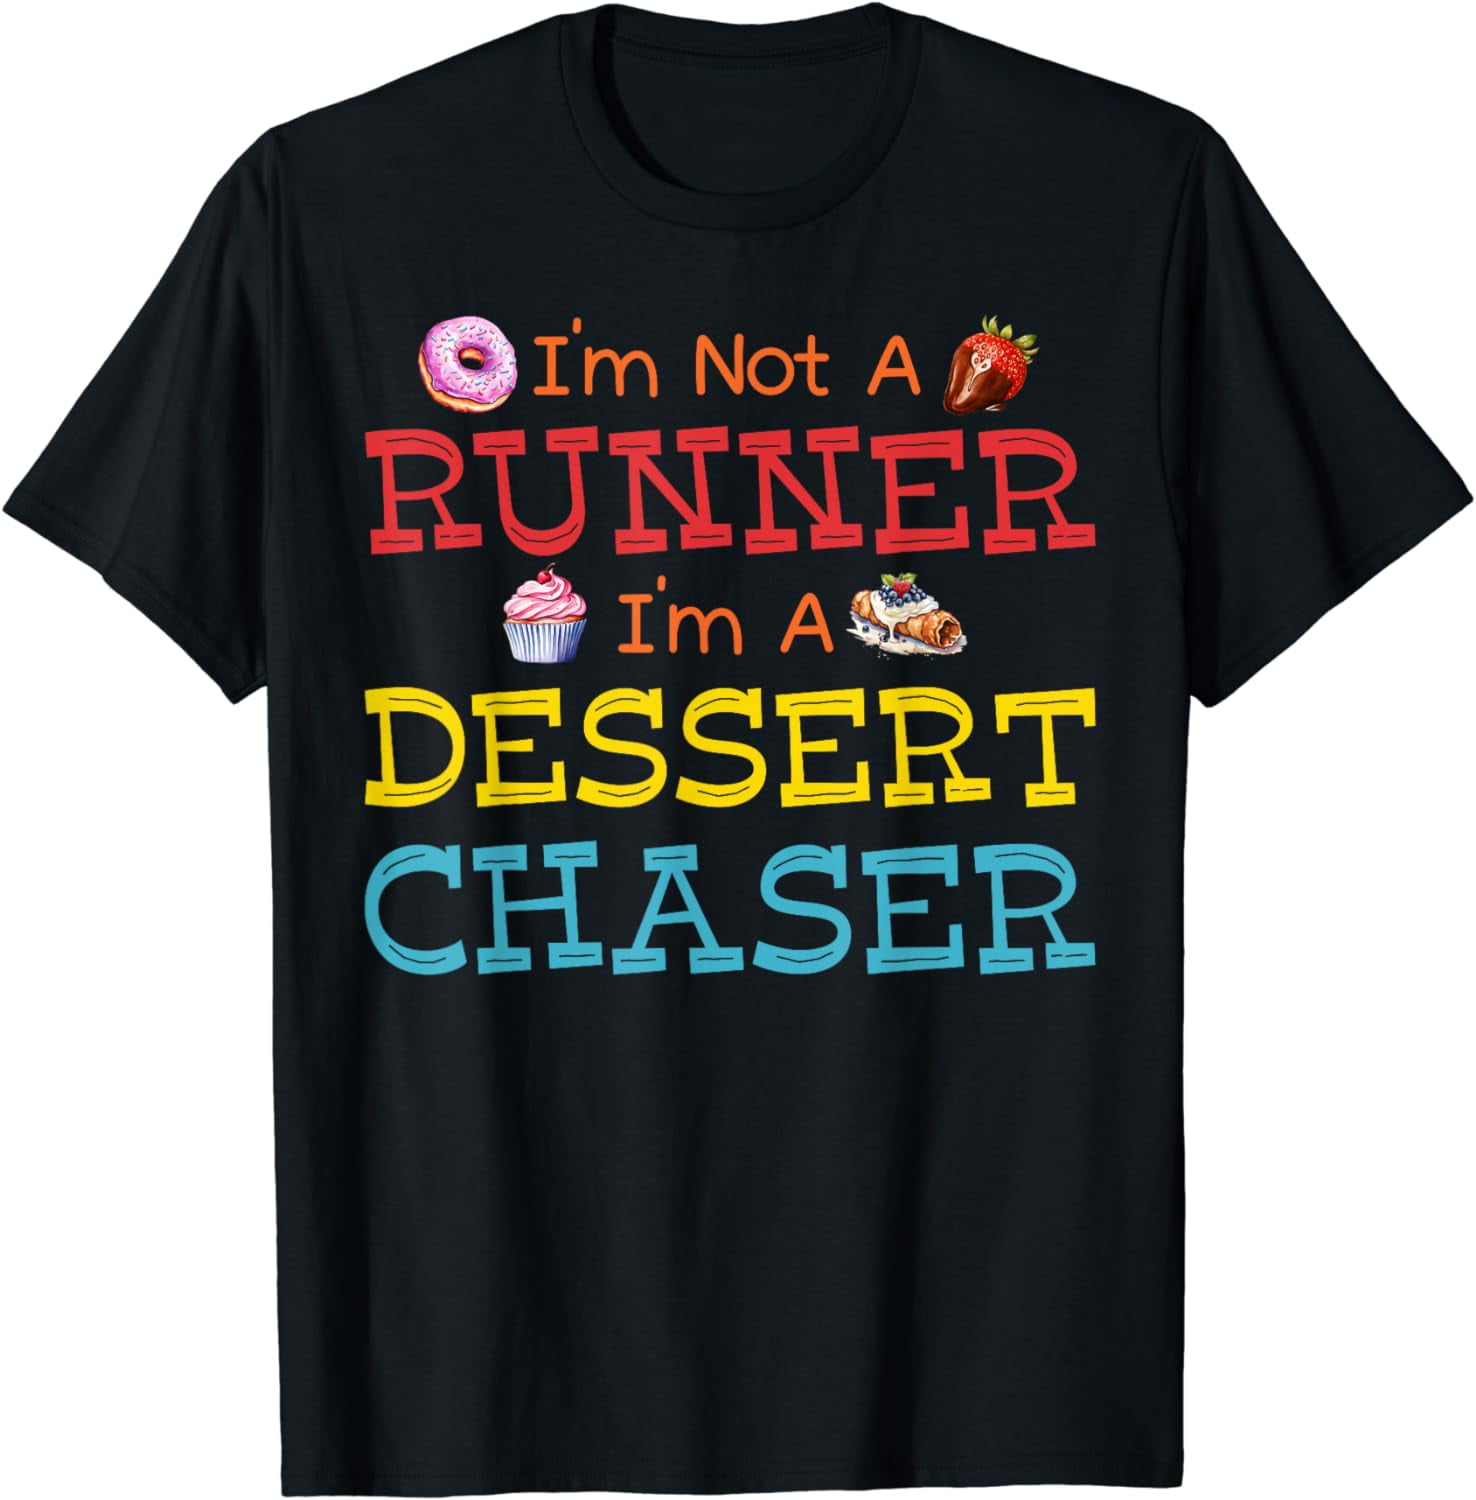 I'm Not A Runner I'm A Dessert Chaser Funny Saying Sarcastic T-Shirt ...